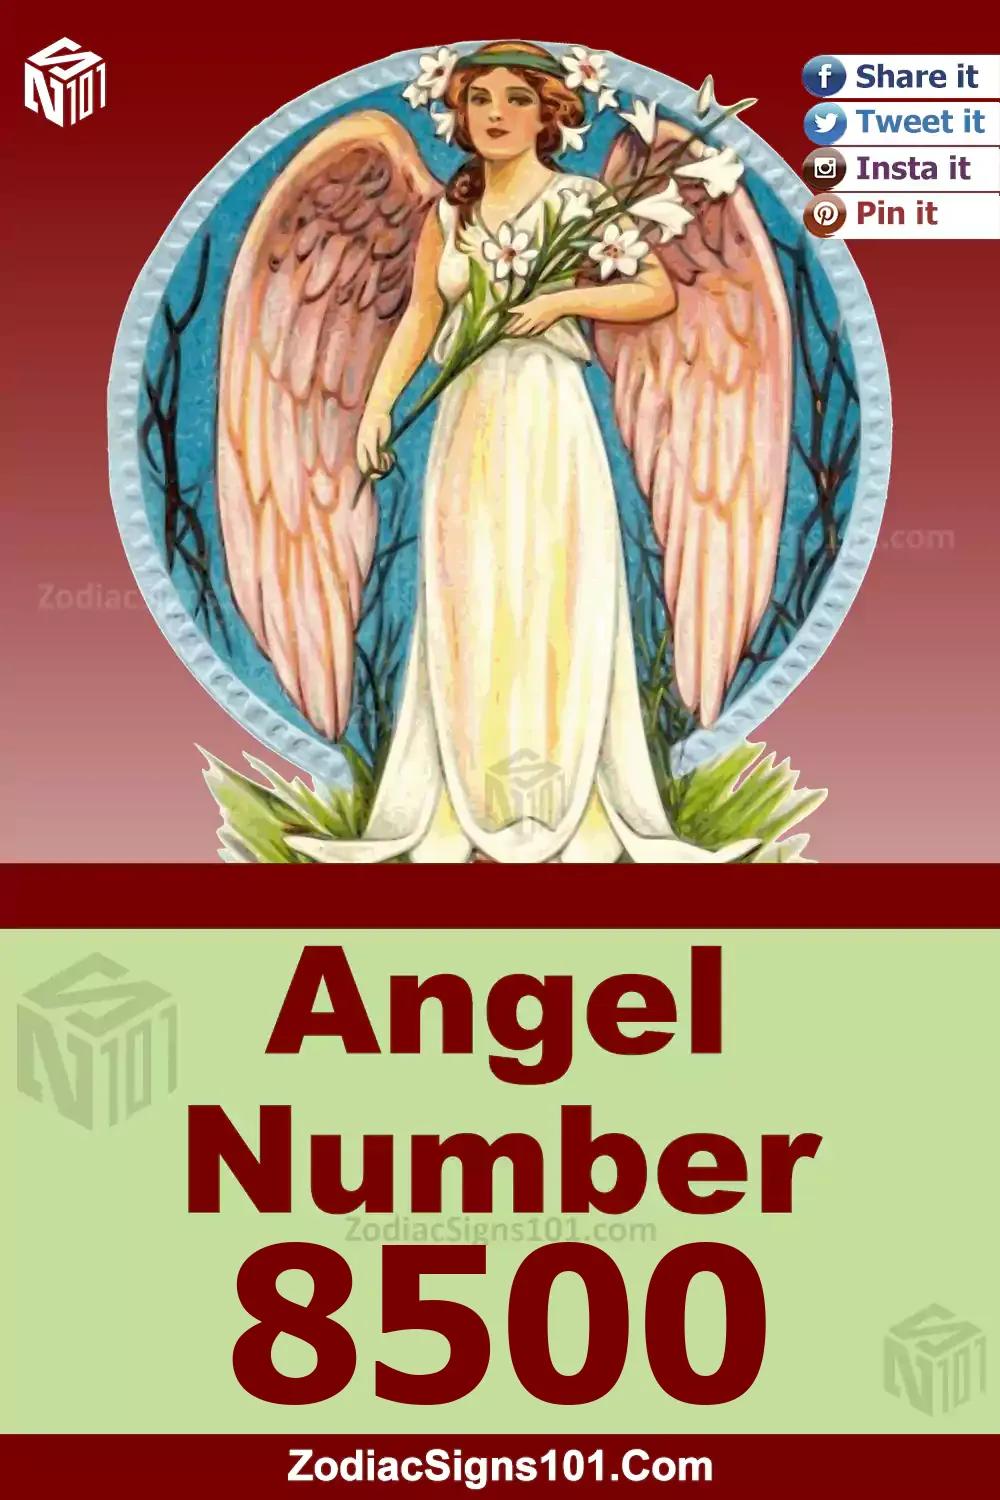 8500 Angel Number Meaning